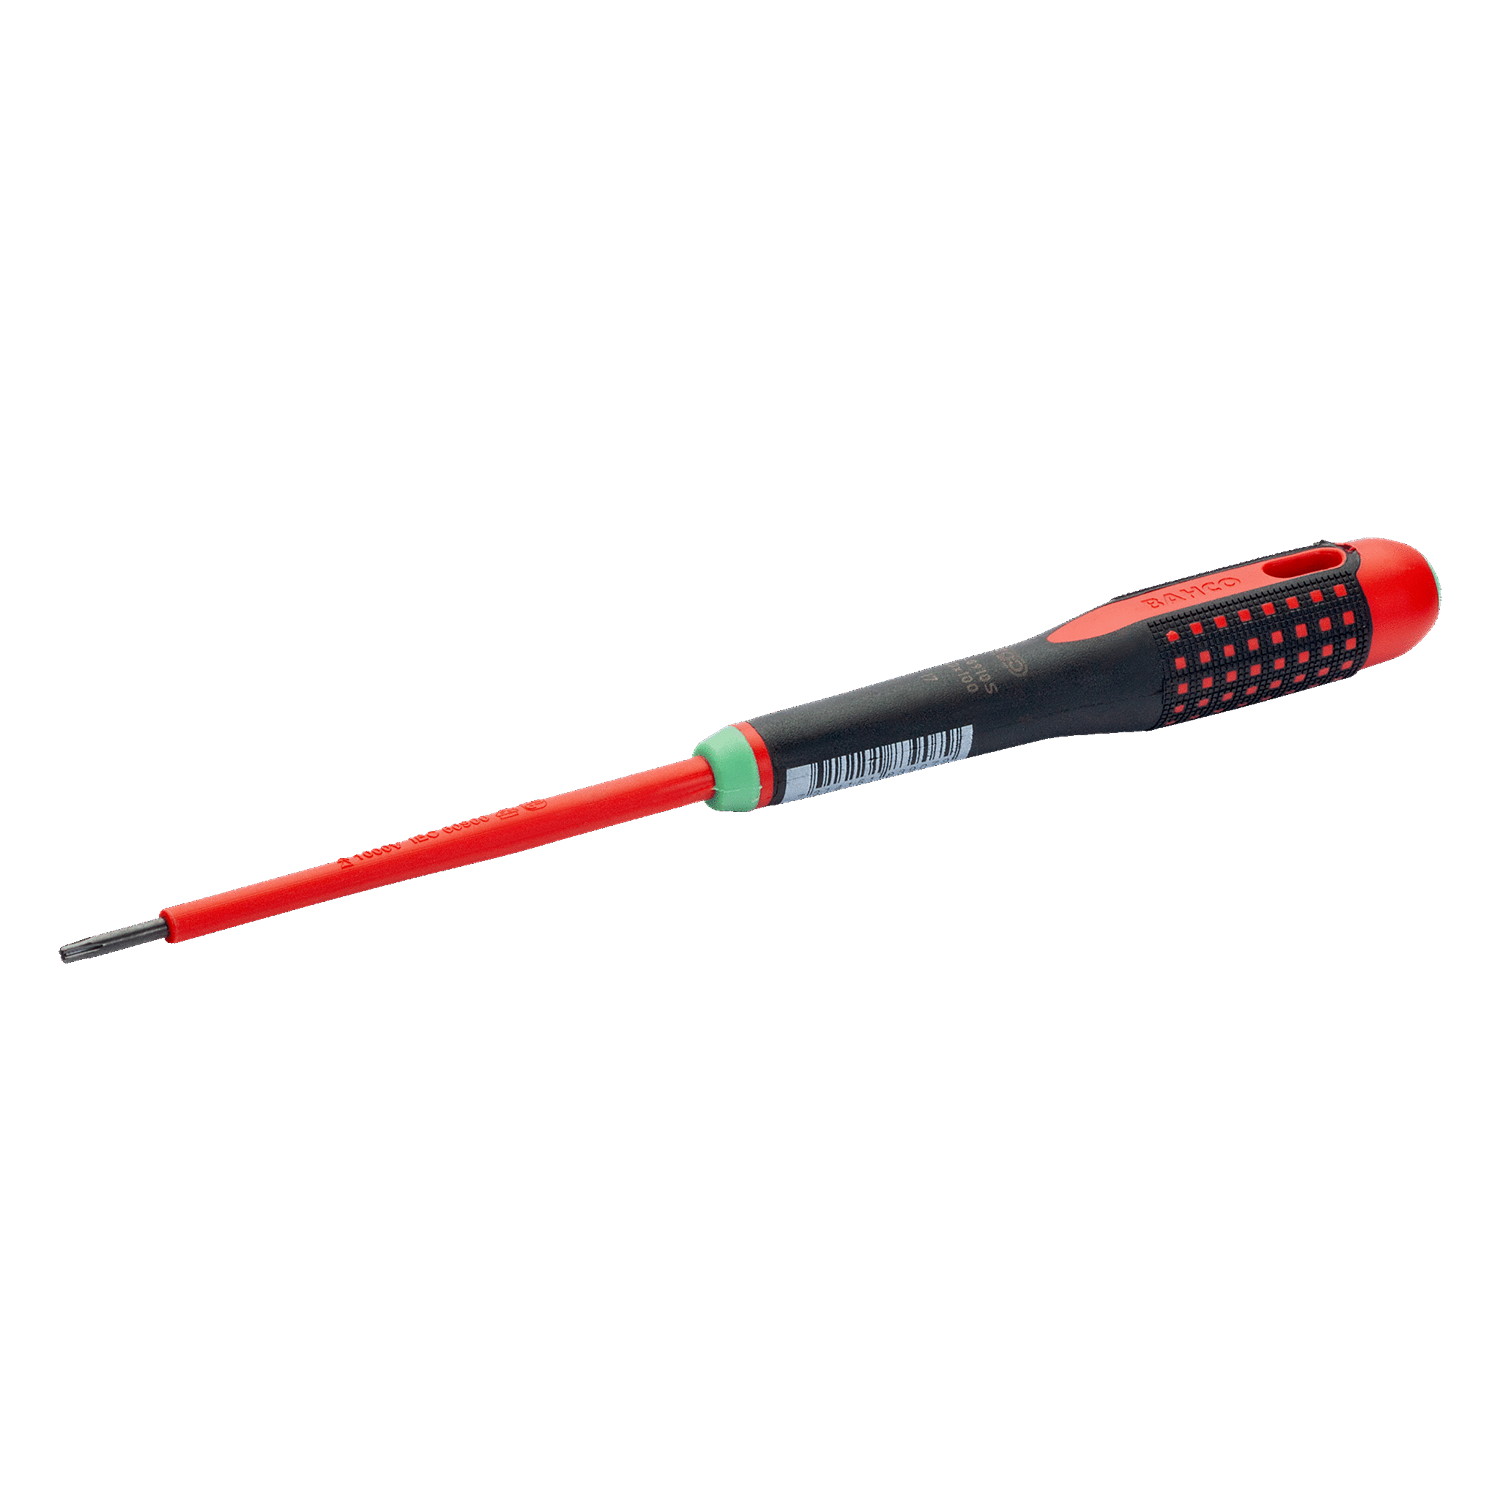 BAHCO BE-8910S - BE-8930S ERGO VDE Insulated TORX Screwdriver - Premium TORX Screwdriver from BAHCO - Shop now at Yew Aik.